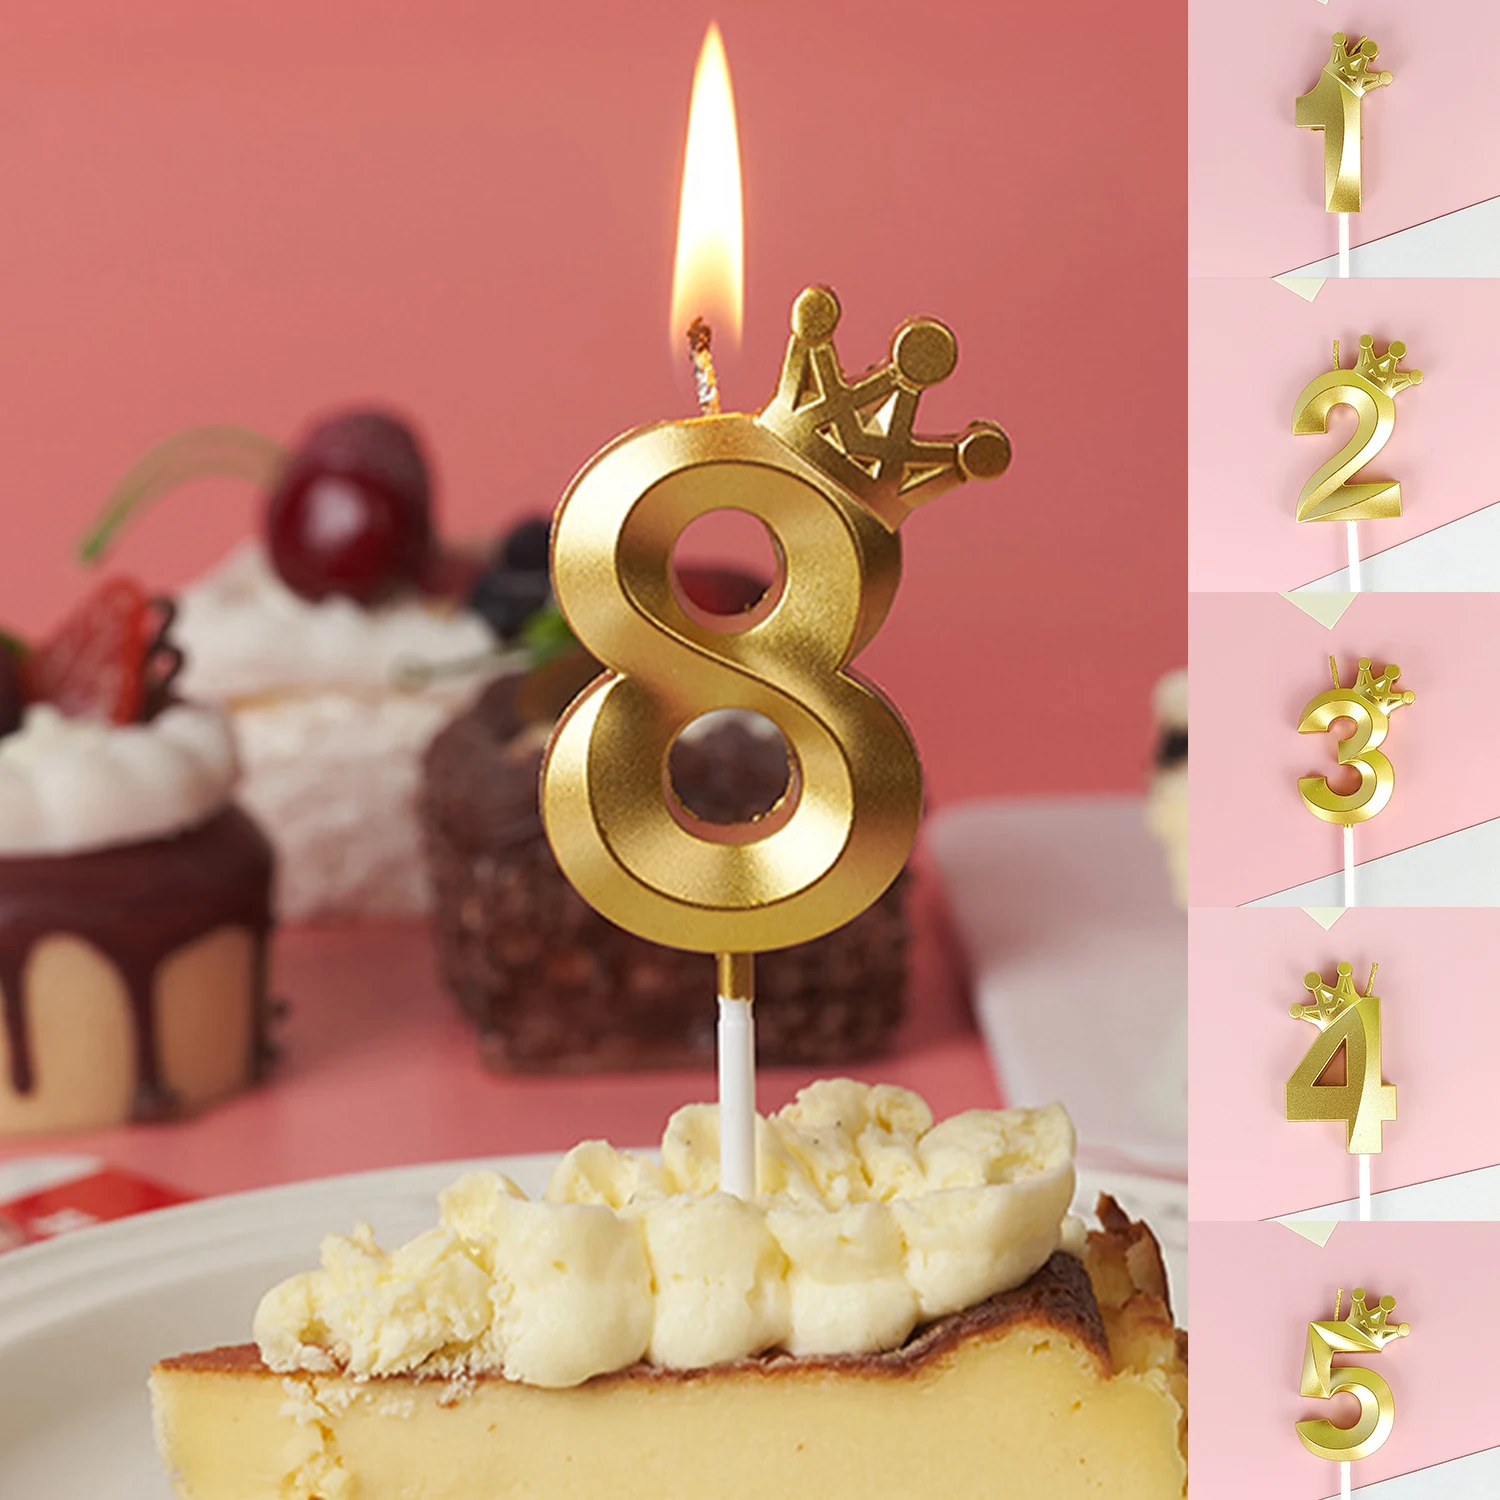 0-9 Number Cake Decorations Romantic Gold Crown Candles Number Topper for Happy Birthday Cake Decoration Queen Baby Shower